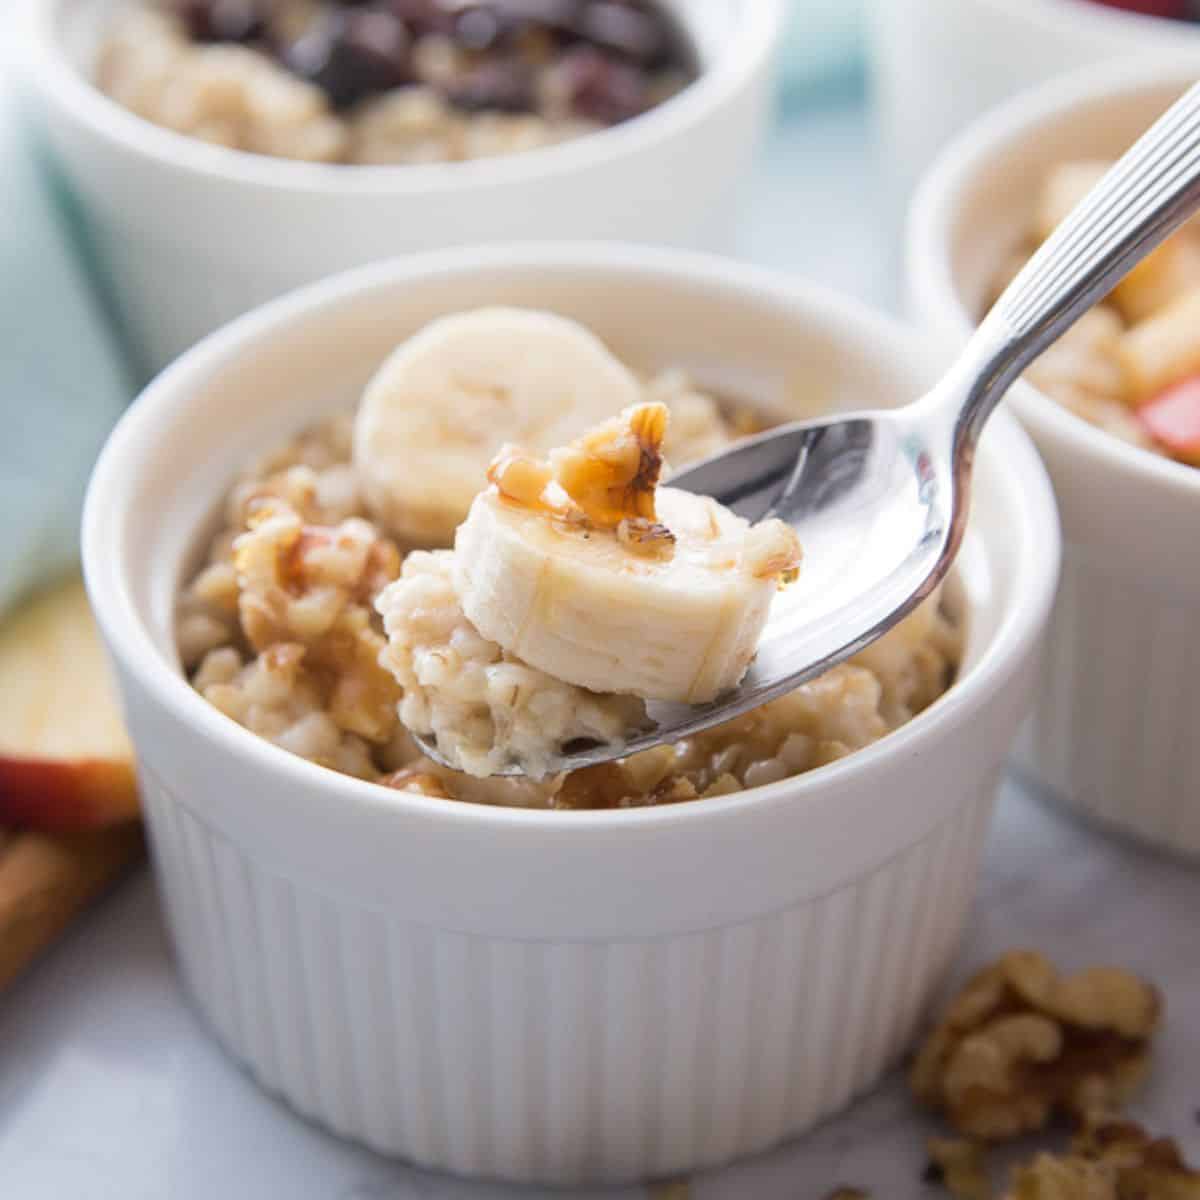 How to Make Overnight Steel Cut Oats - 7 Ways! - Simply Quinoa